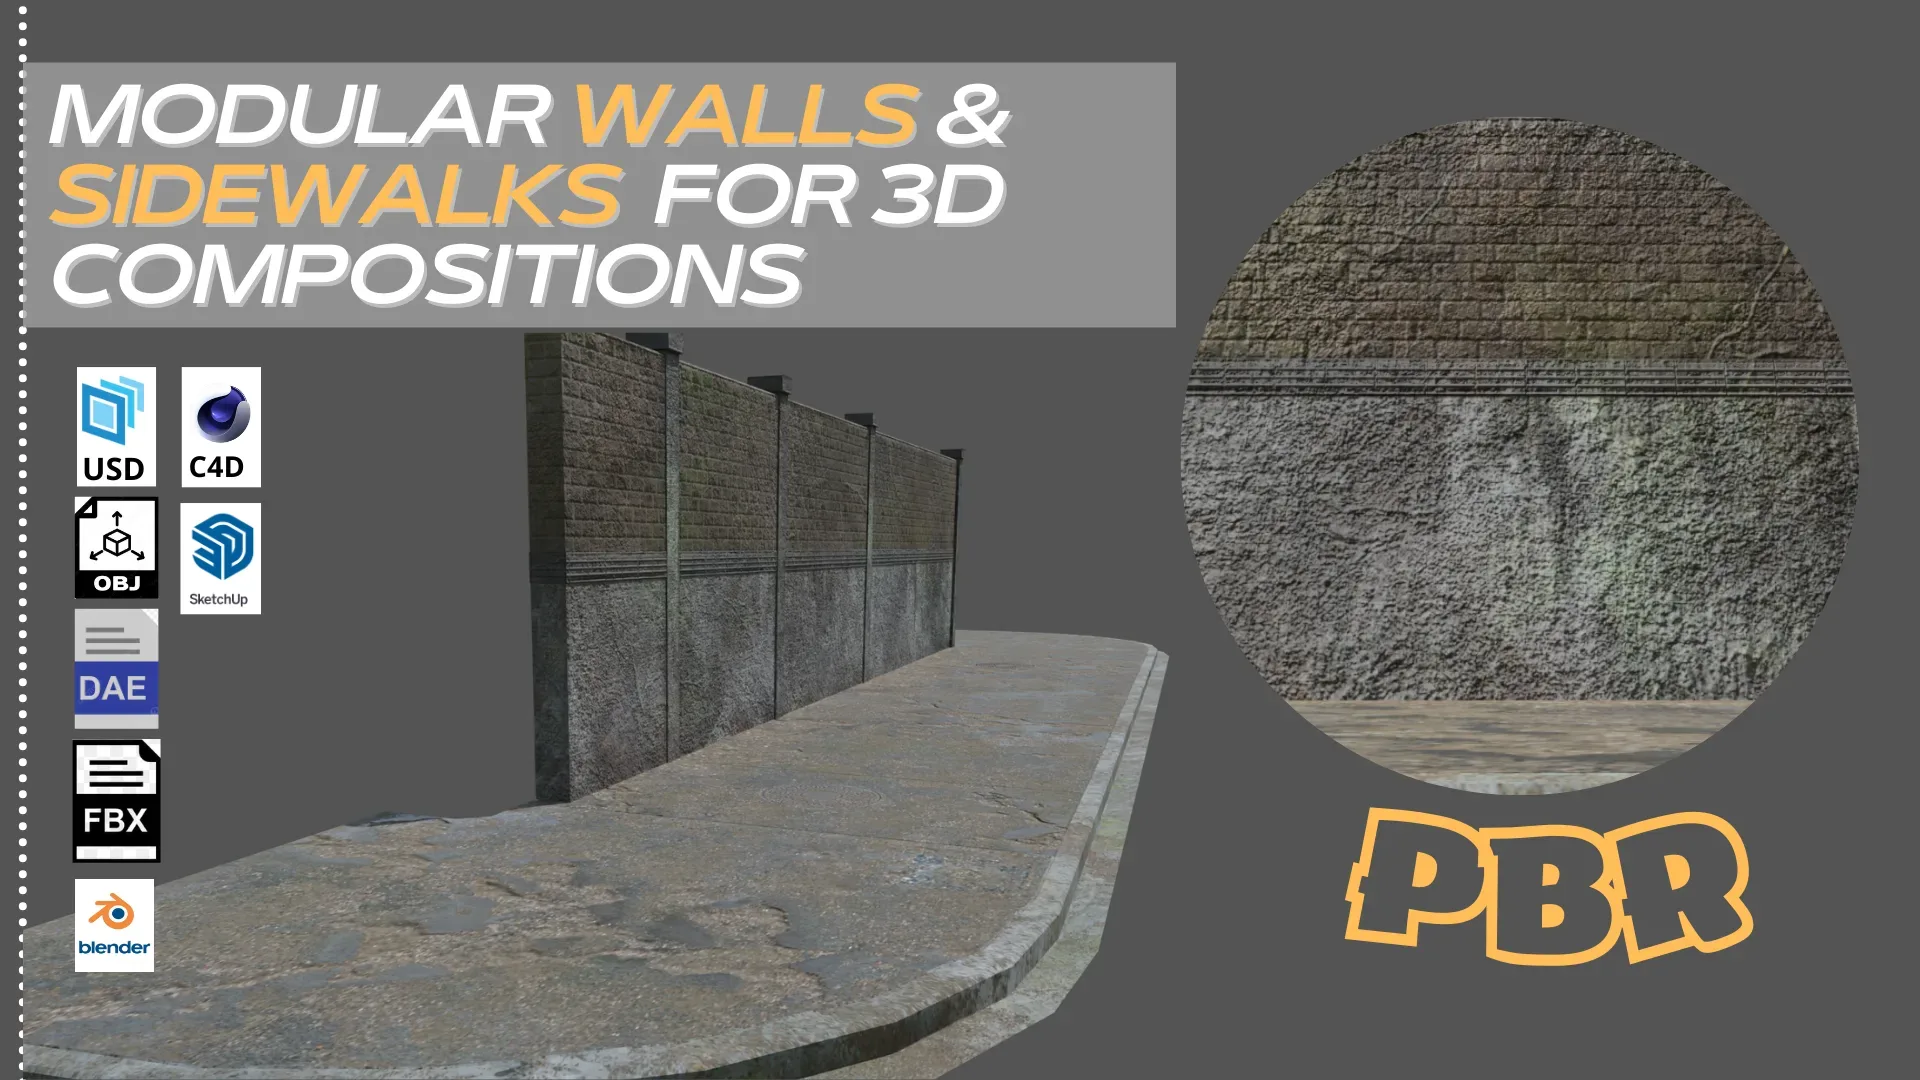 MODULAR WALLS - SIDEWALKS FOR 3D COMPOSITIONS Low-poly 3D model